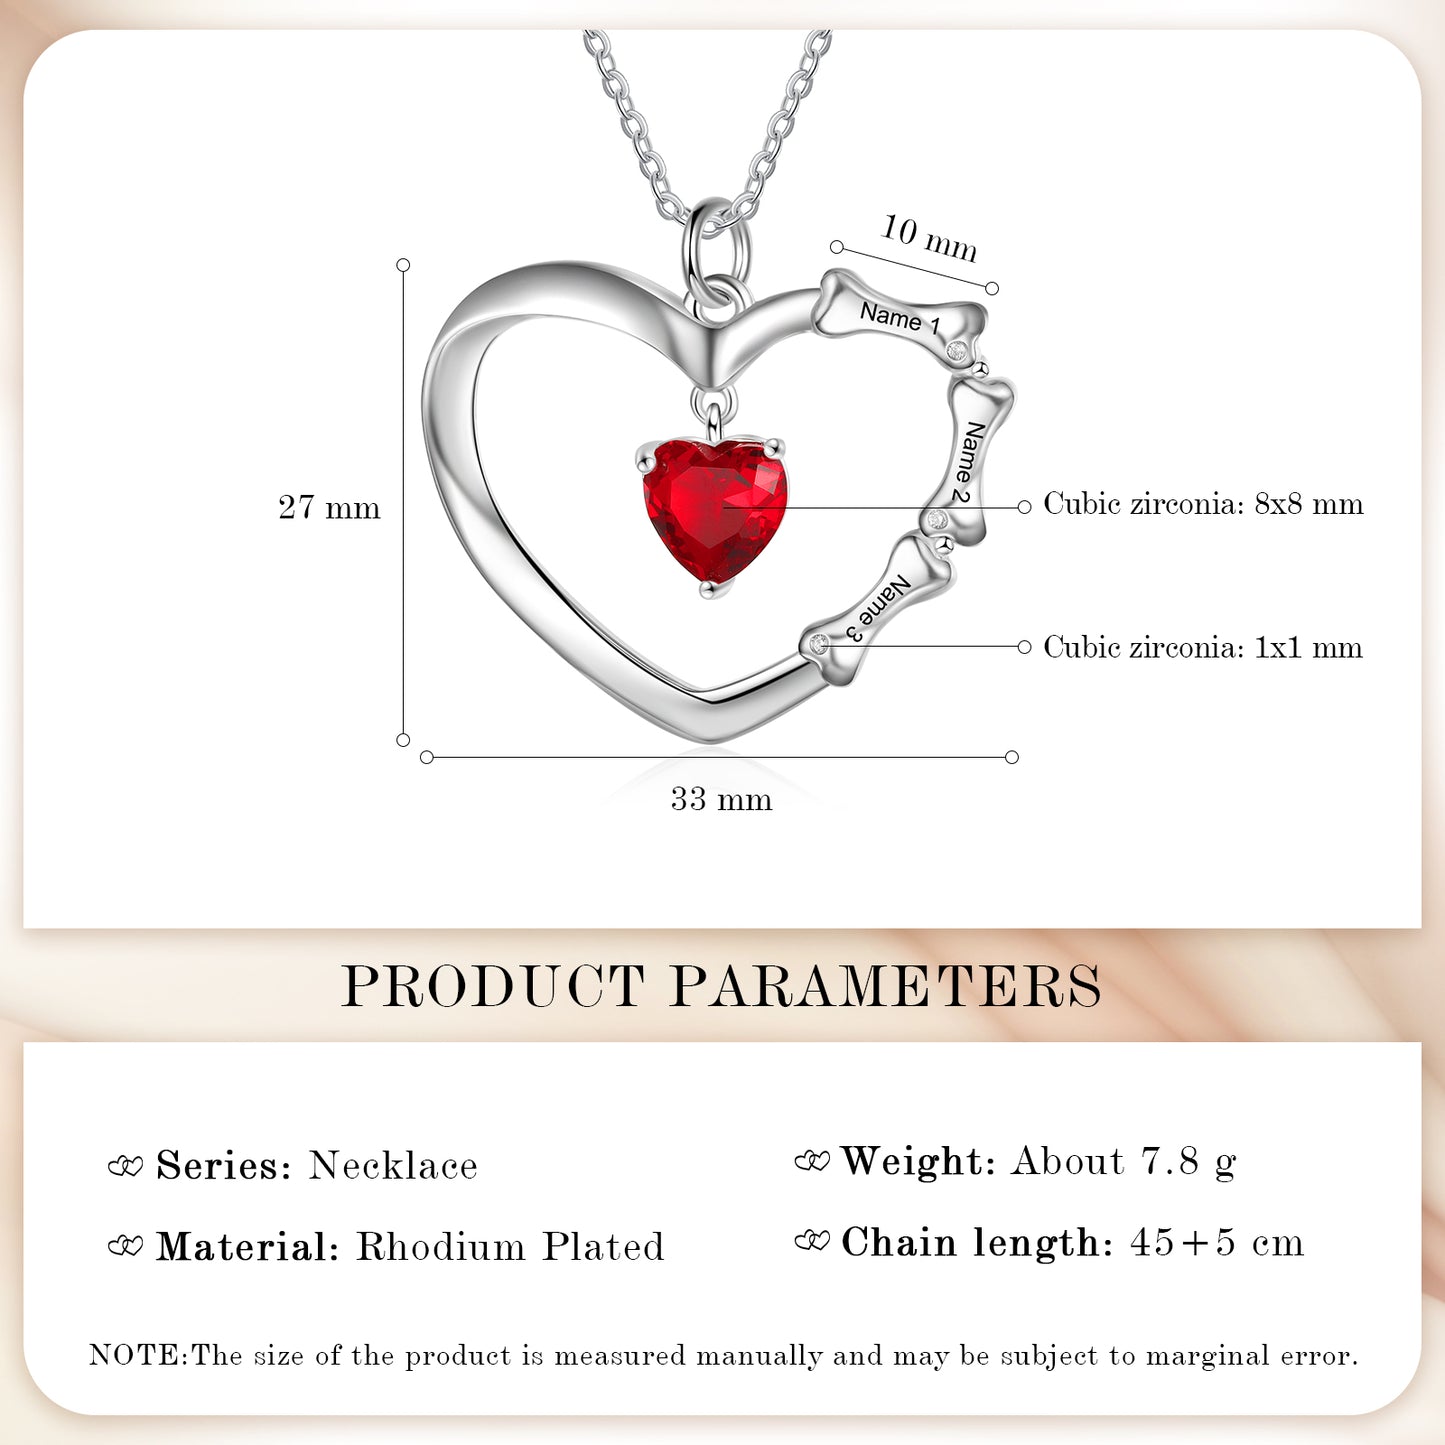 Personalized White Gold Plated Heart Necklace with Birthstones